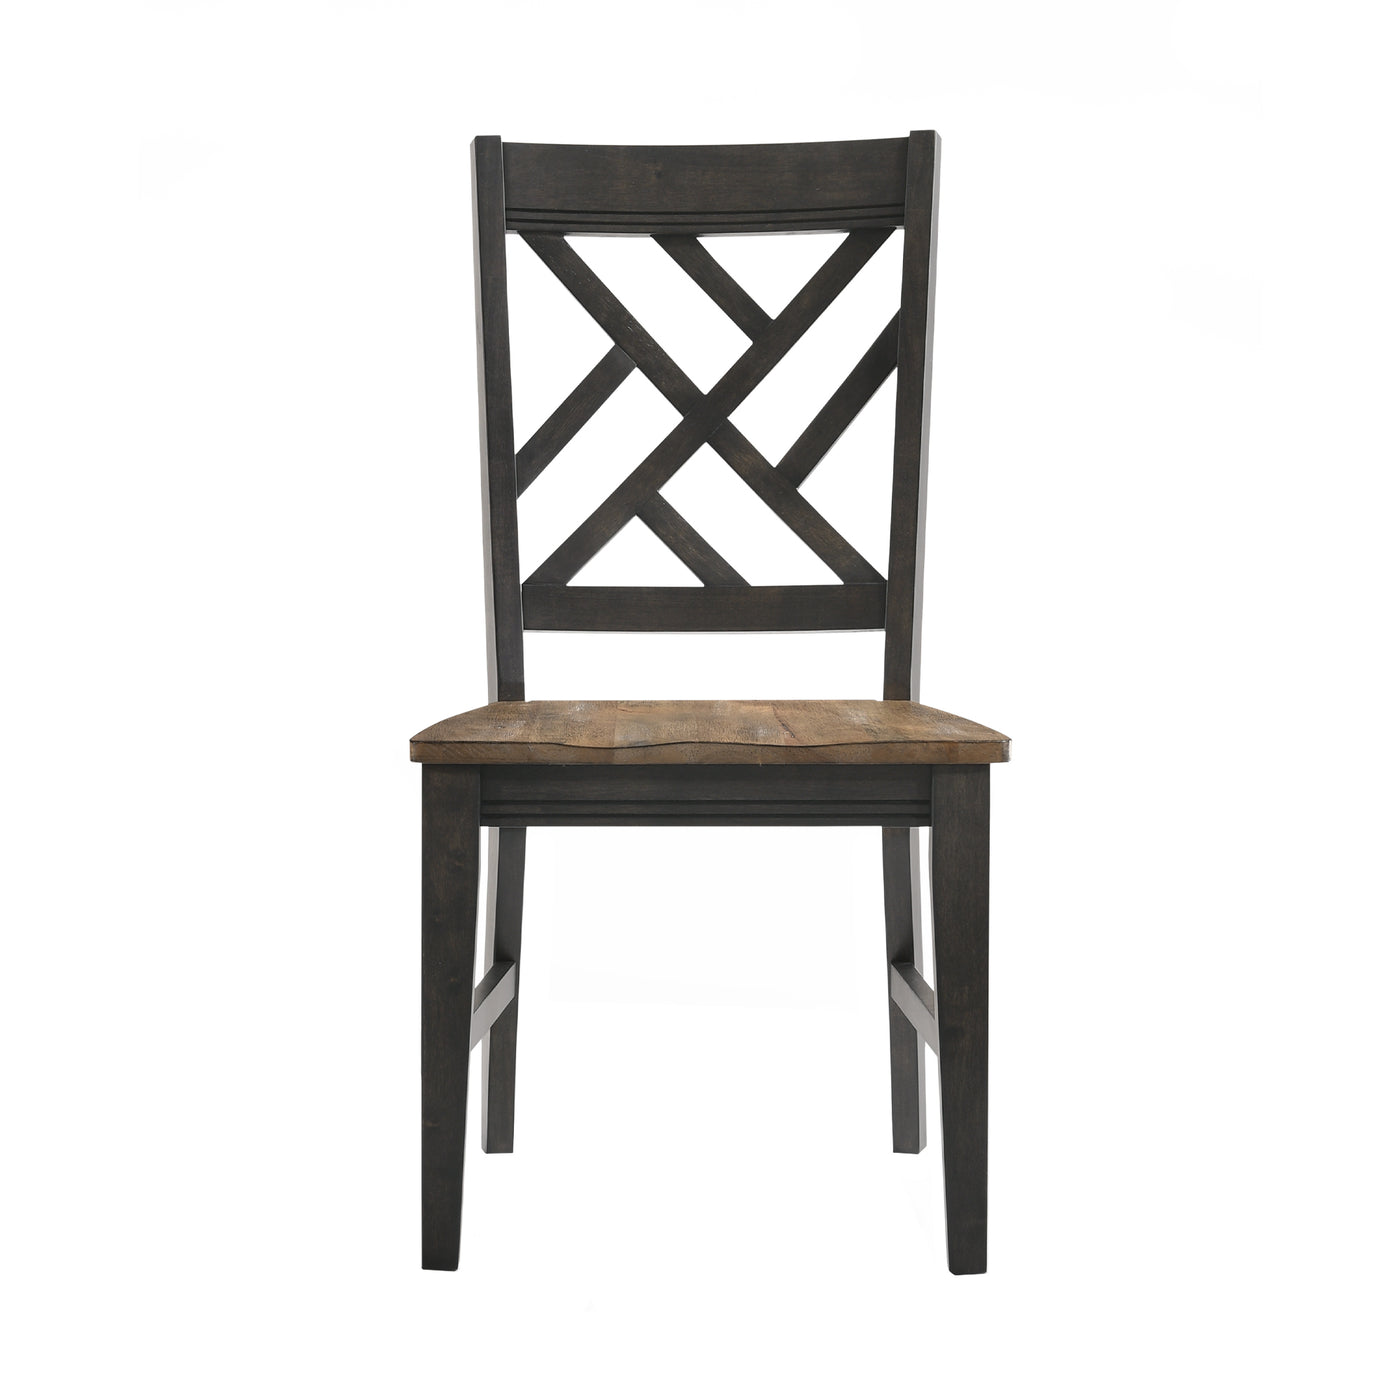 Addie 3-Piece Drop Leaf Set with Lattice-Back Dining Chairs - Brown